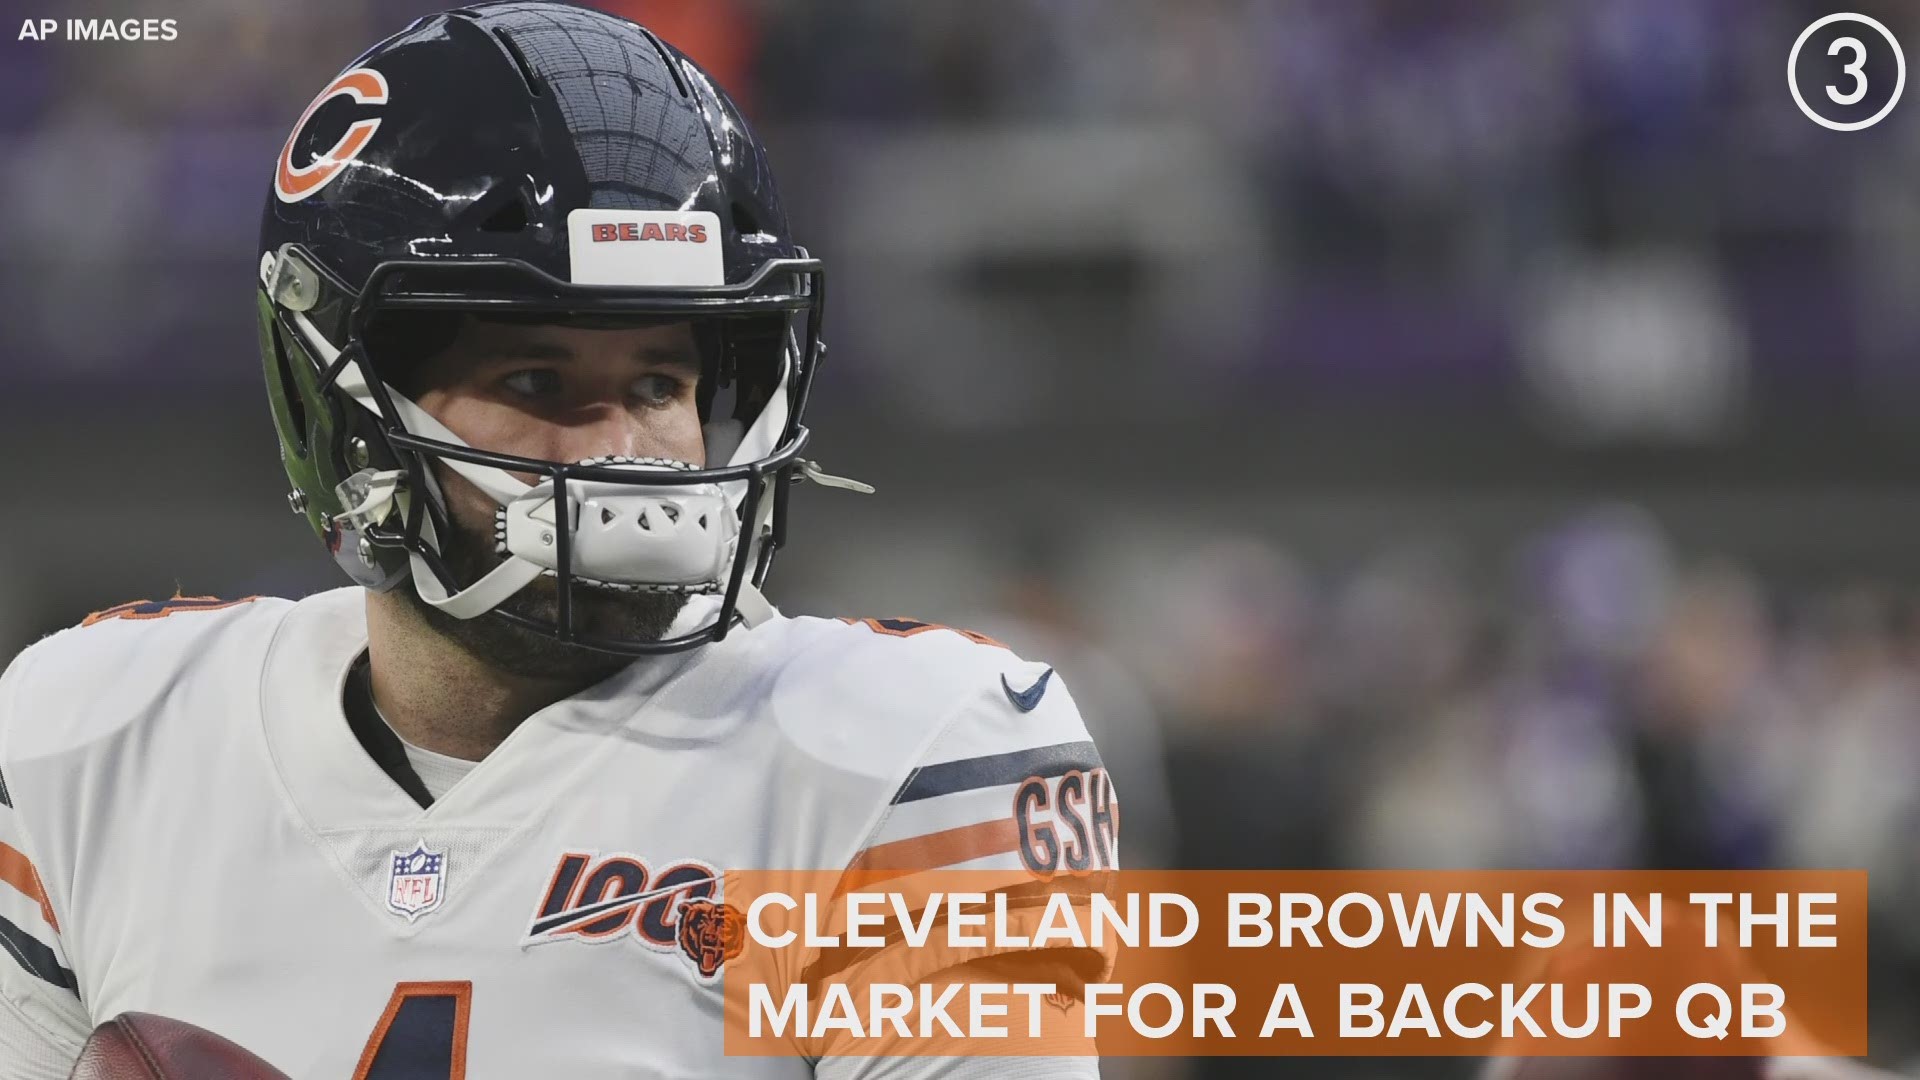 According to Jason La Canfora, the Cleveland Browns plan to make a run at signing backup quarterback Chase Daniel. Free Agency starts on March 18.